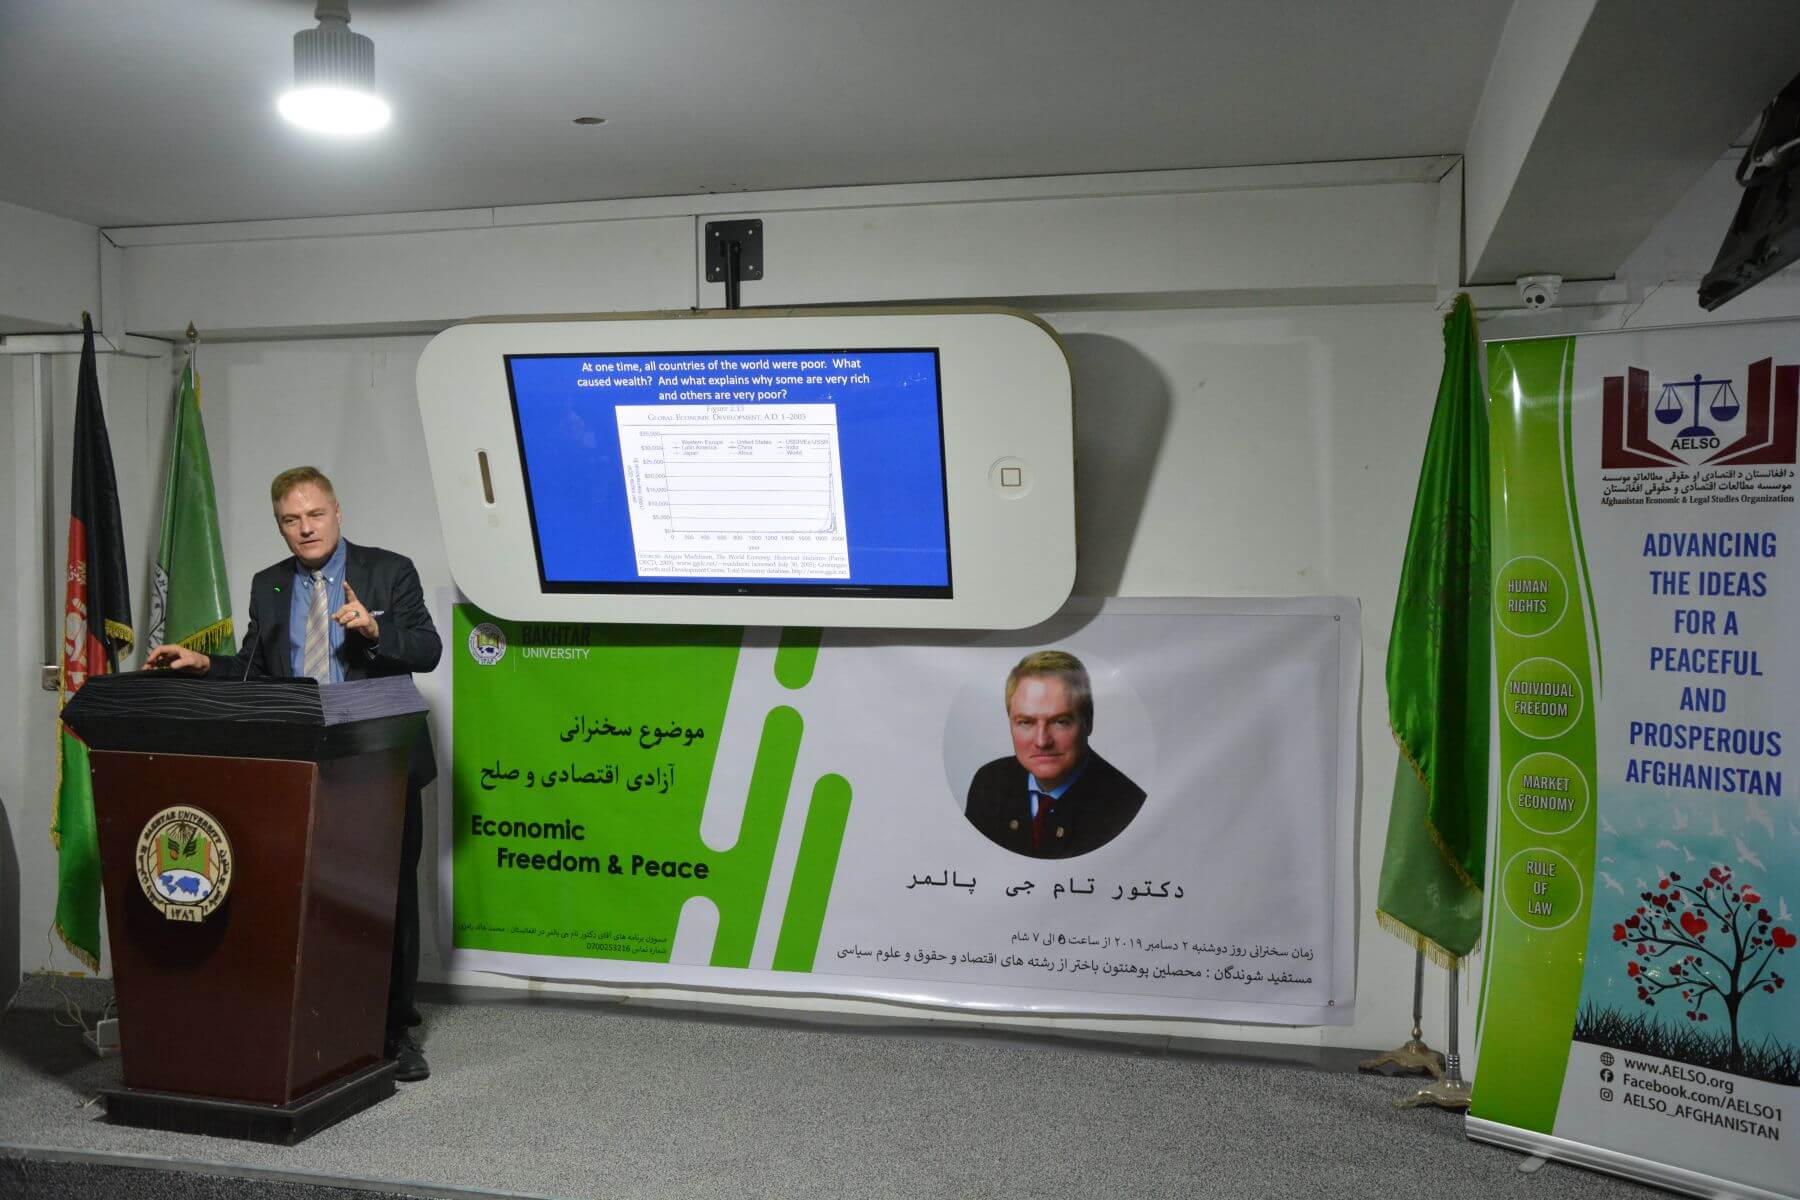 On Dec 02, 2019 Dr. Tom G. Palmer talked about Economic Freedom & Peace at Bakhtar University for a group of students, university lecturers, civil society and human rights activists.